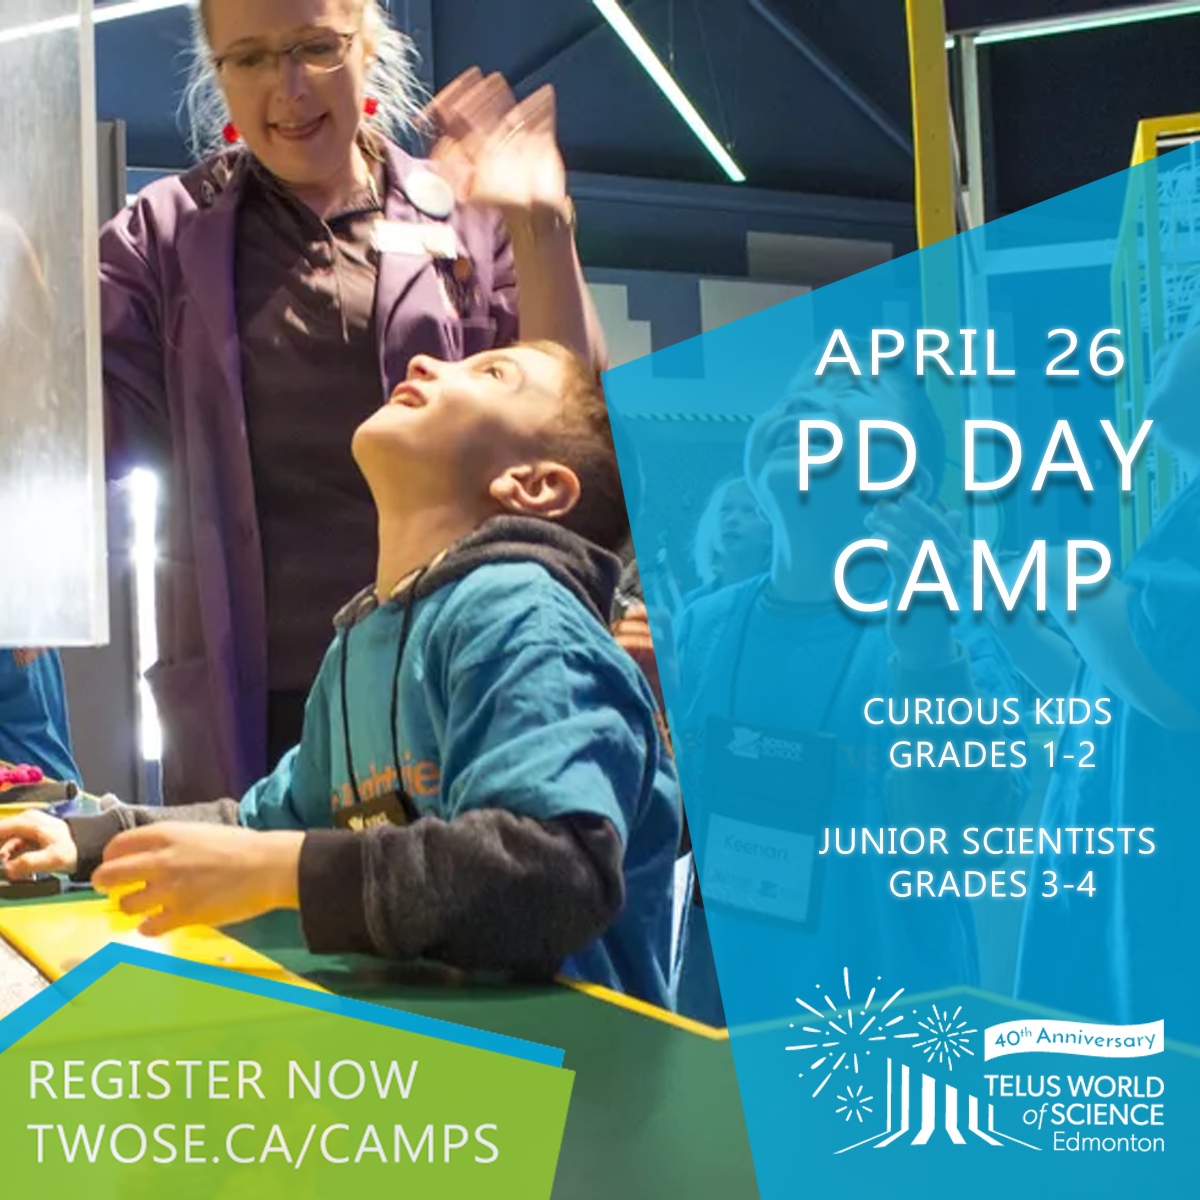 Keep your little ones engaged on PD day. Spots are still available for PD Day Camps on April 26! Curious Kids (Grades 1-2) 🧐🔍 Junior Scientists (Grades 3-4) 🧑‍🔬 ➡️ Register at twose.ca/camps